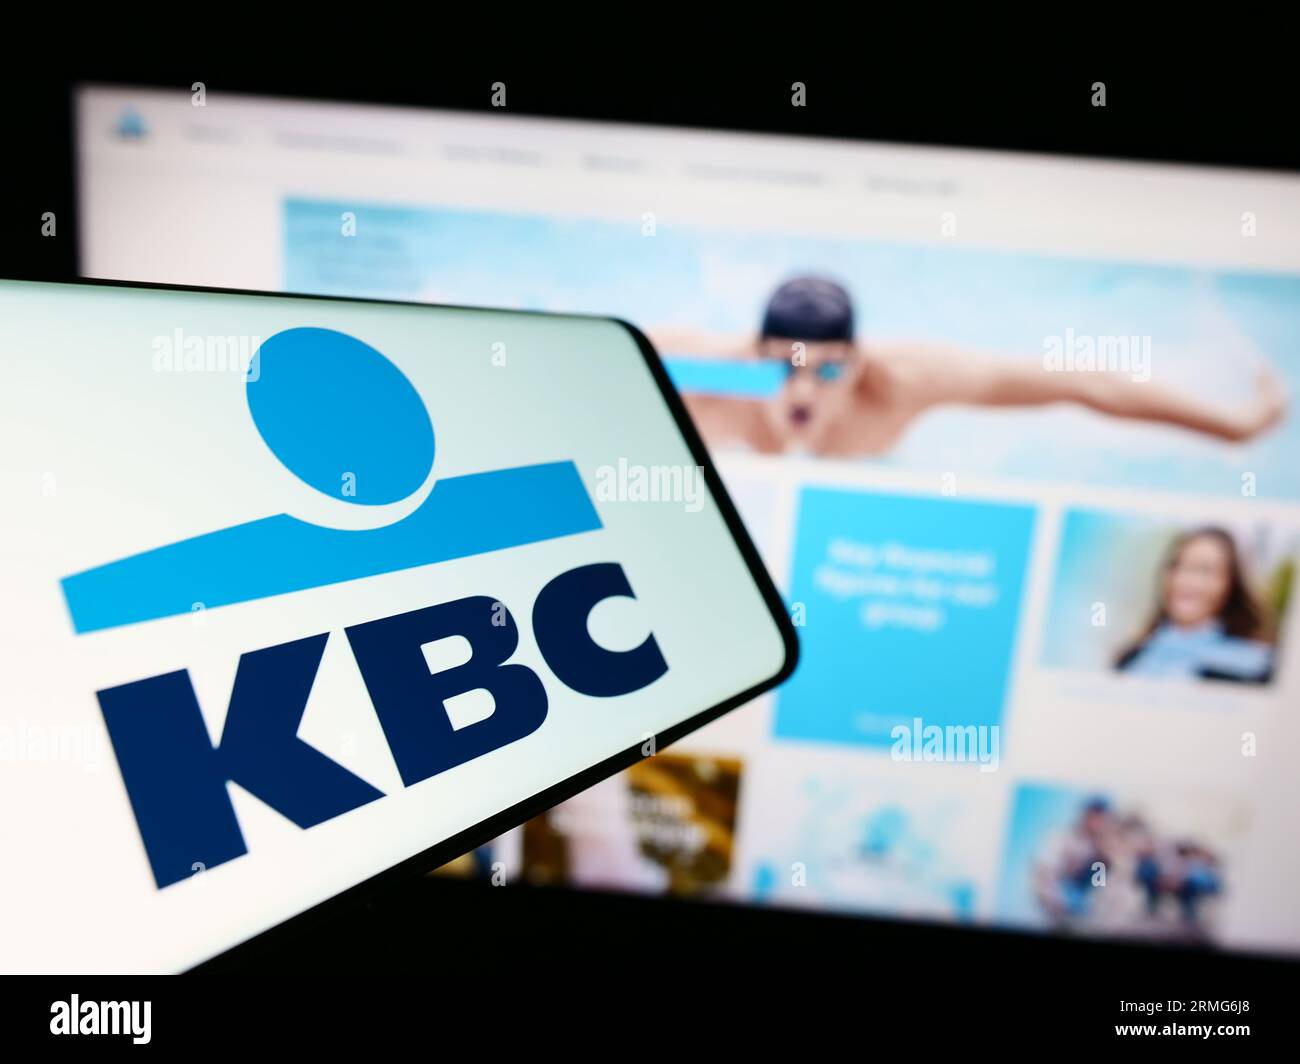 Mobile phone with logo of Belgian financial company KBC Group NV  on screen in front of business website. Focus on center of phone display. Stock Photo